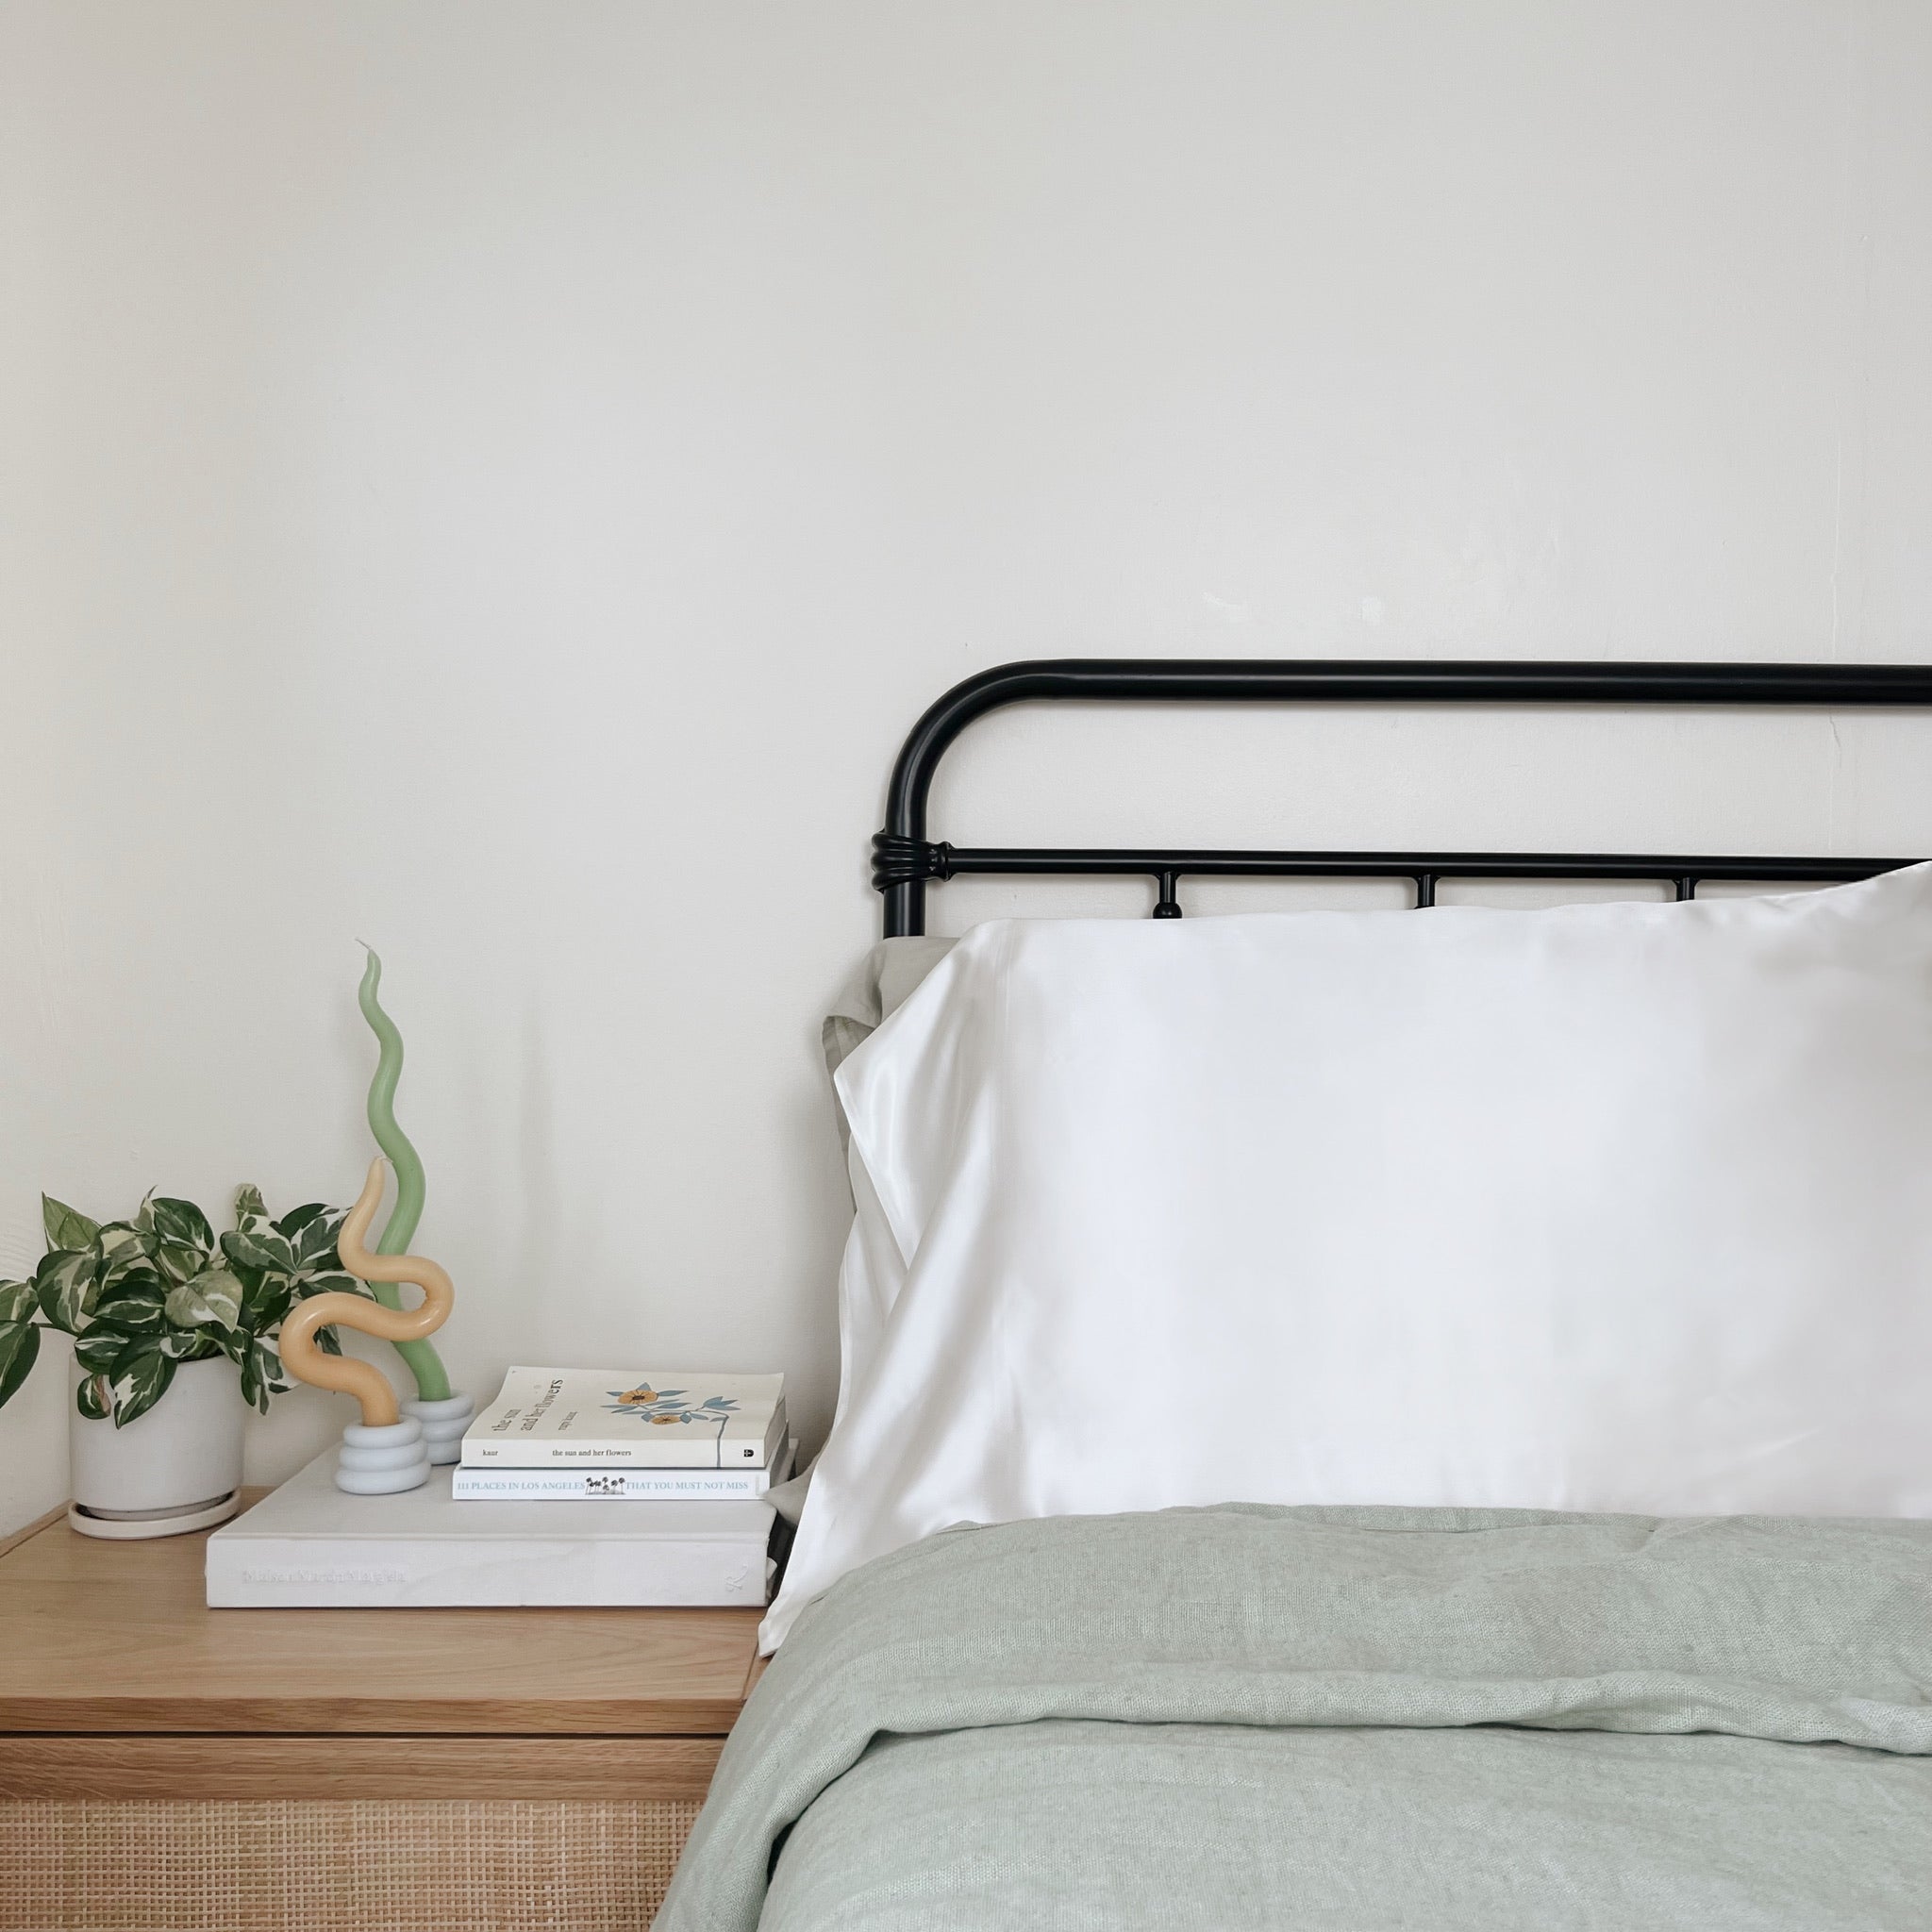 An ivory silk pillow case laying on sage green linen bedsheets on a bed with a black metal frame.